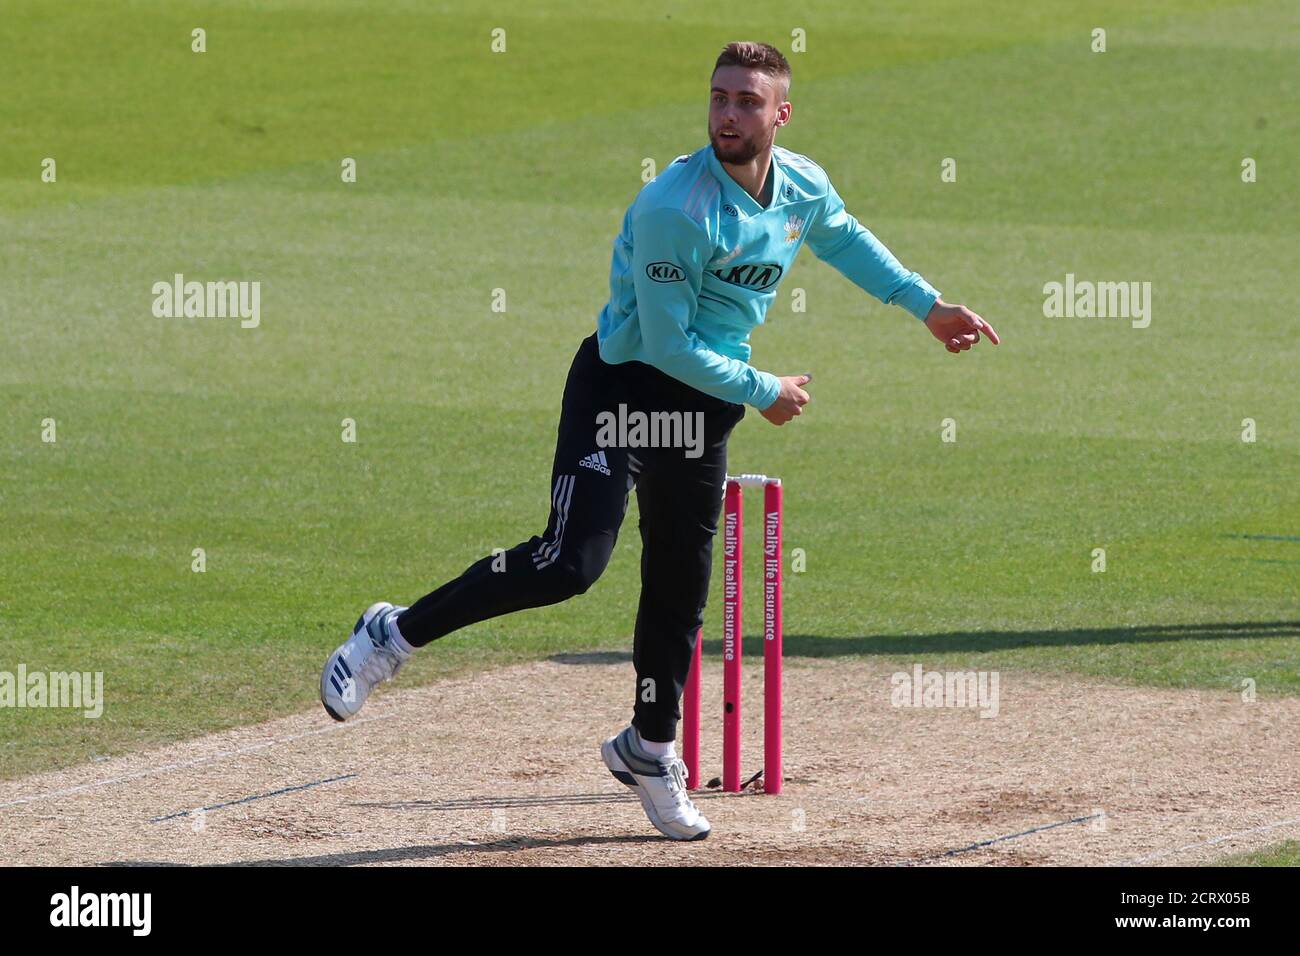 London, UK. 20th Sep, 2020. LONDON, ENGLAND, SEPTEMBER 20 2020: Will Jacks of Surrey bowling during the Vitality Blast match Surrey against Kent at The Kia Oval Cricket Ground, London, England, 20 September 2020 Credit: European Sports Photo Agency/Alamy Live News Stock Photo